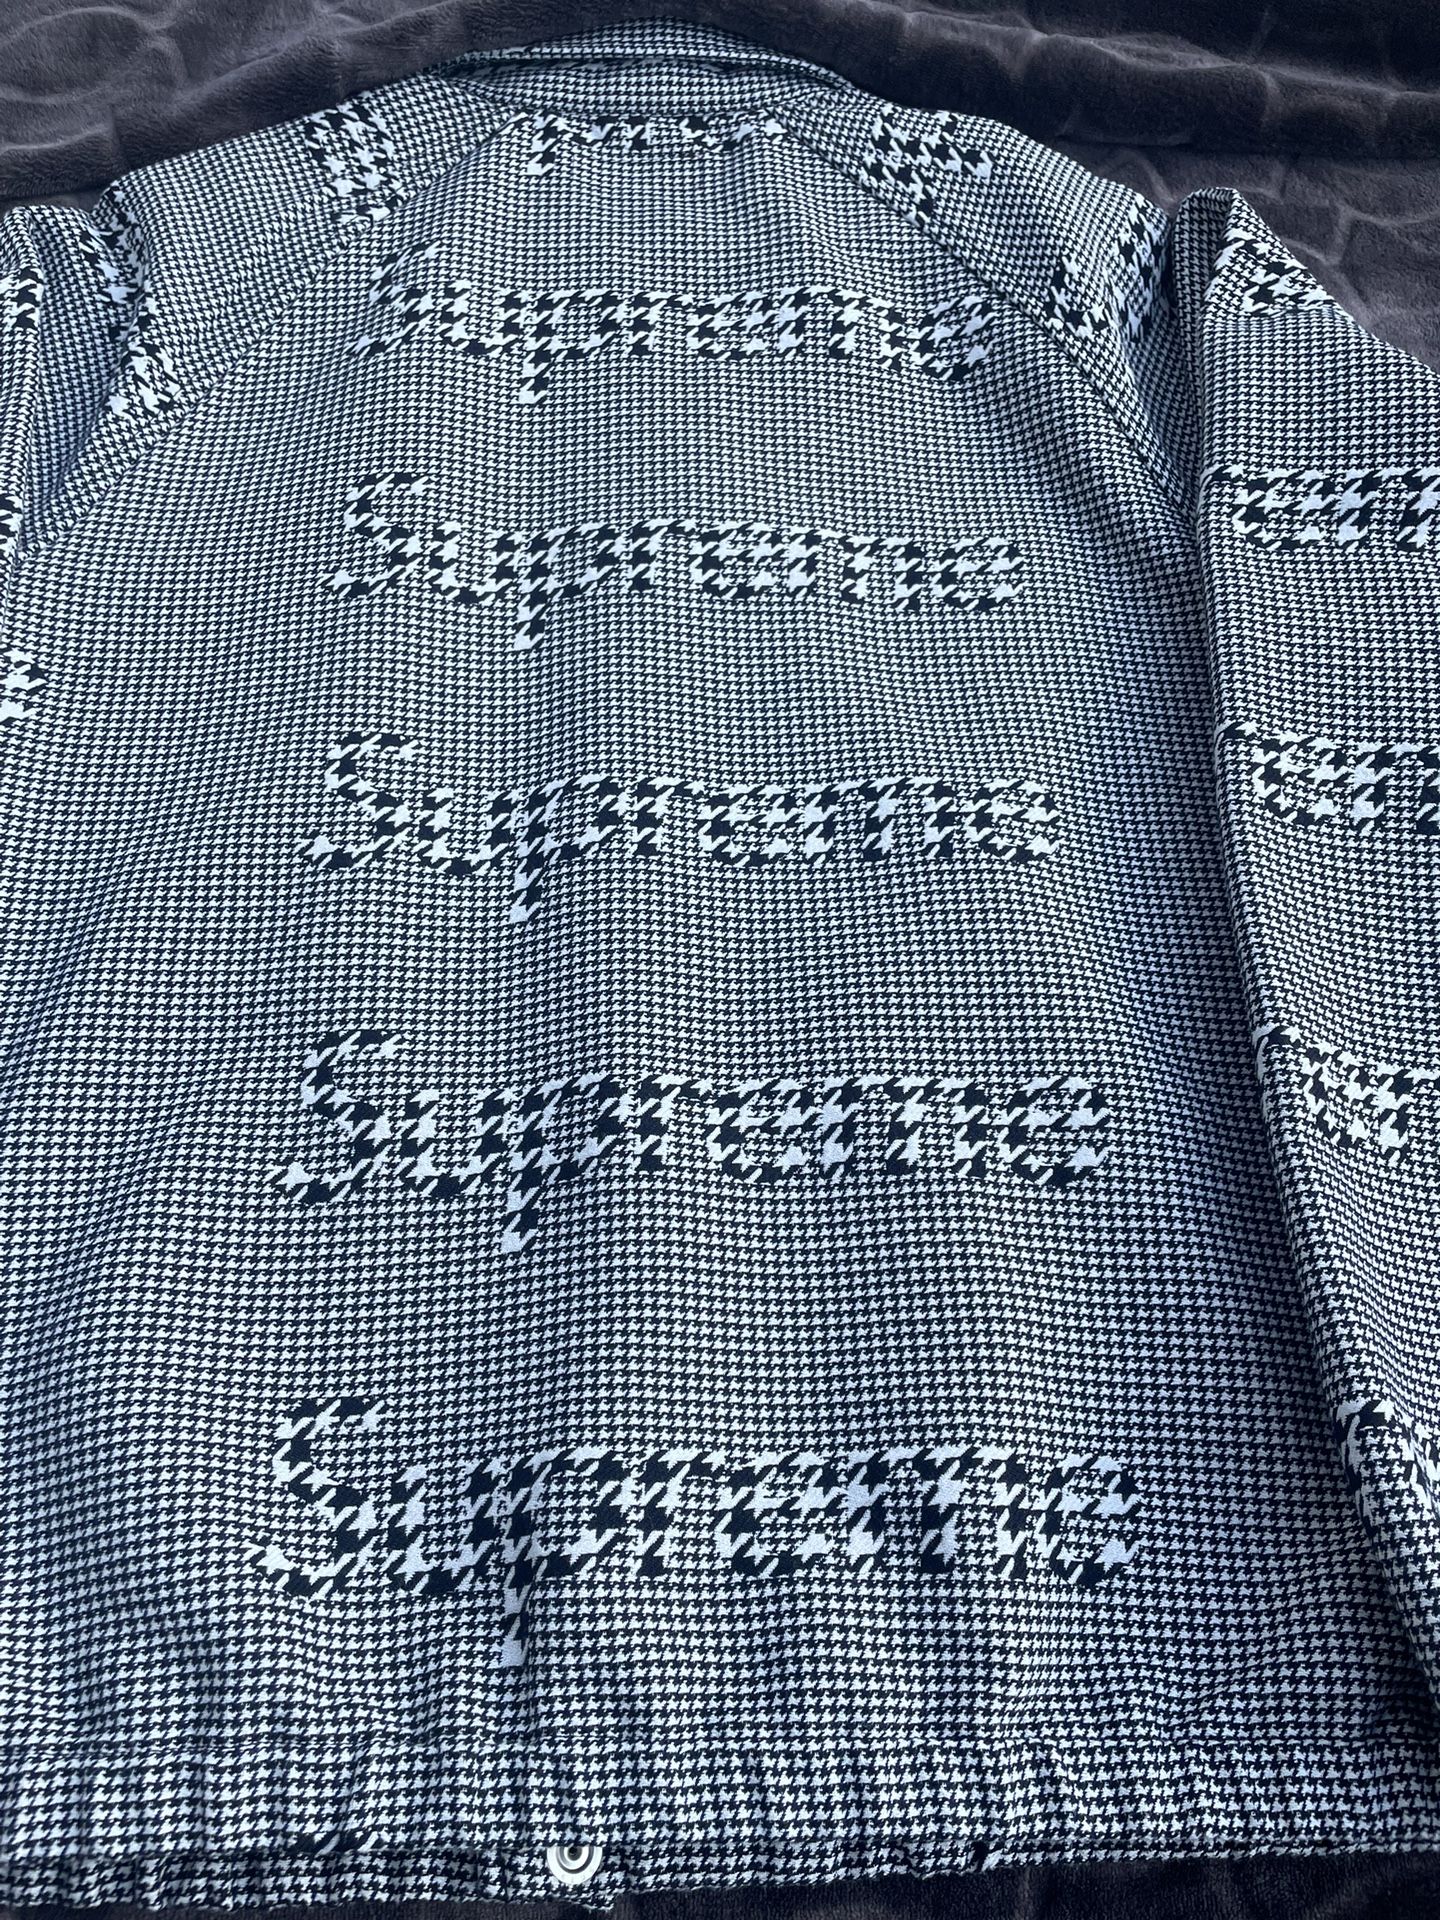 F/W2020 Supreme Houndstooth Logos Snap Front Jacket Size Large for